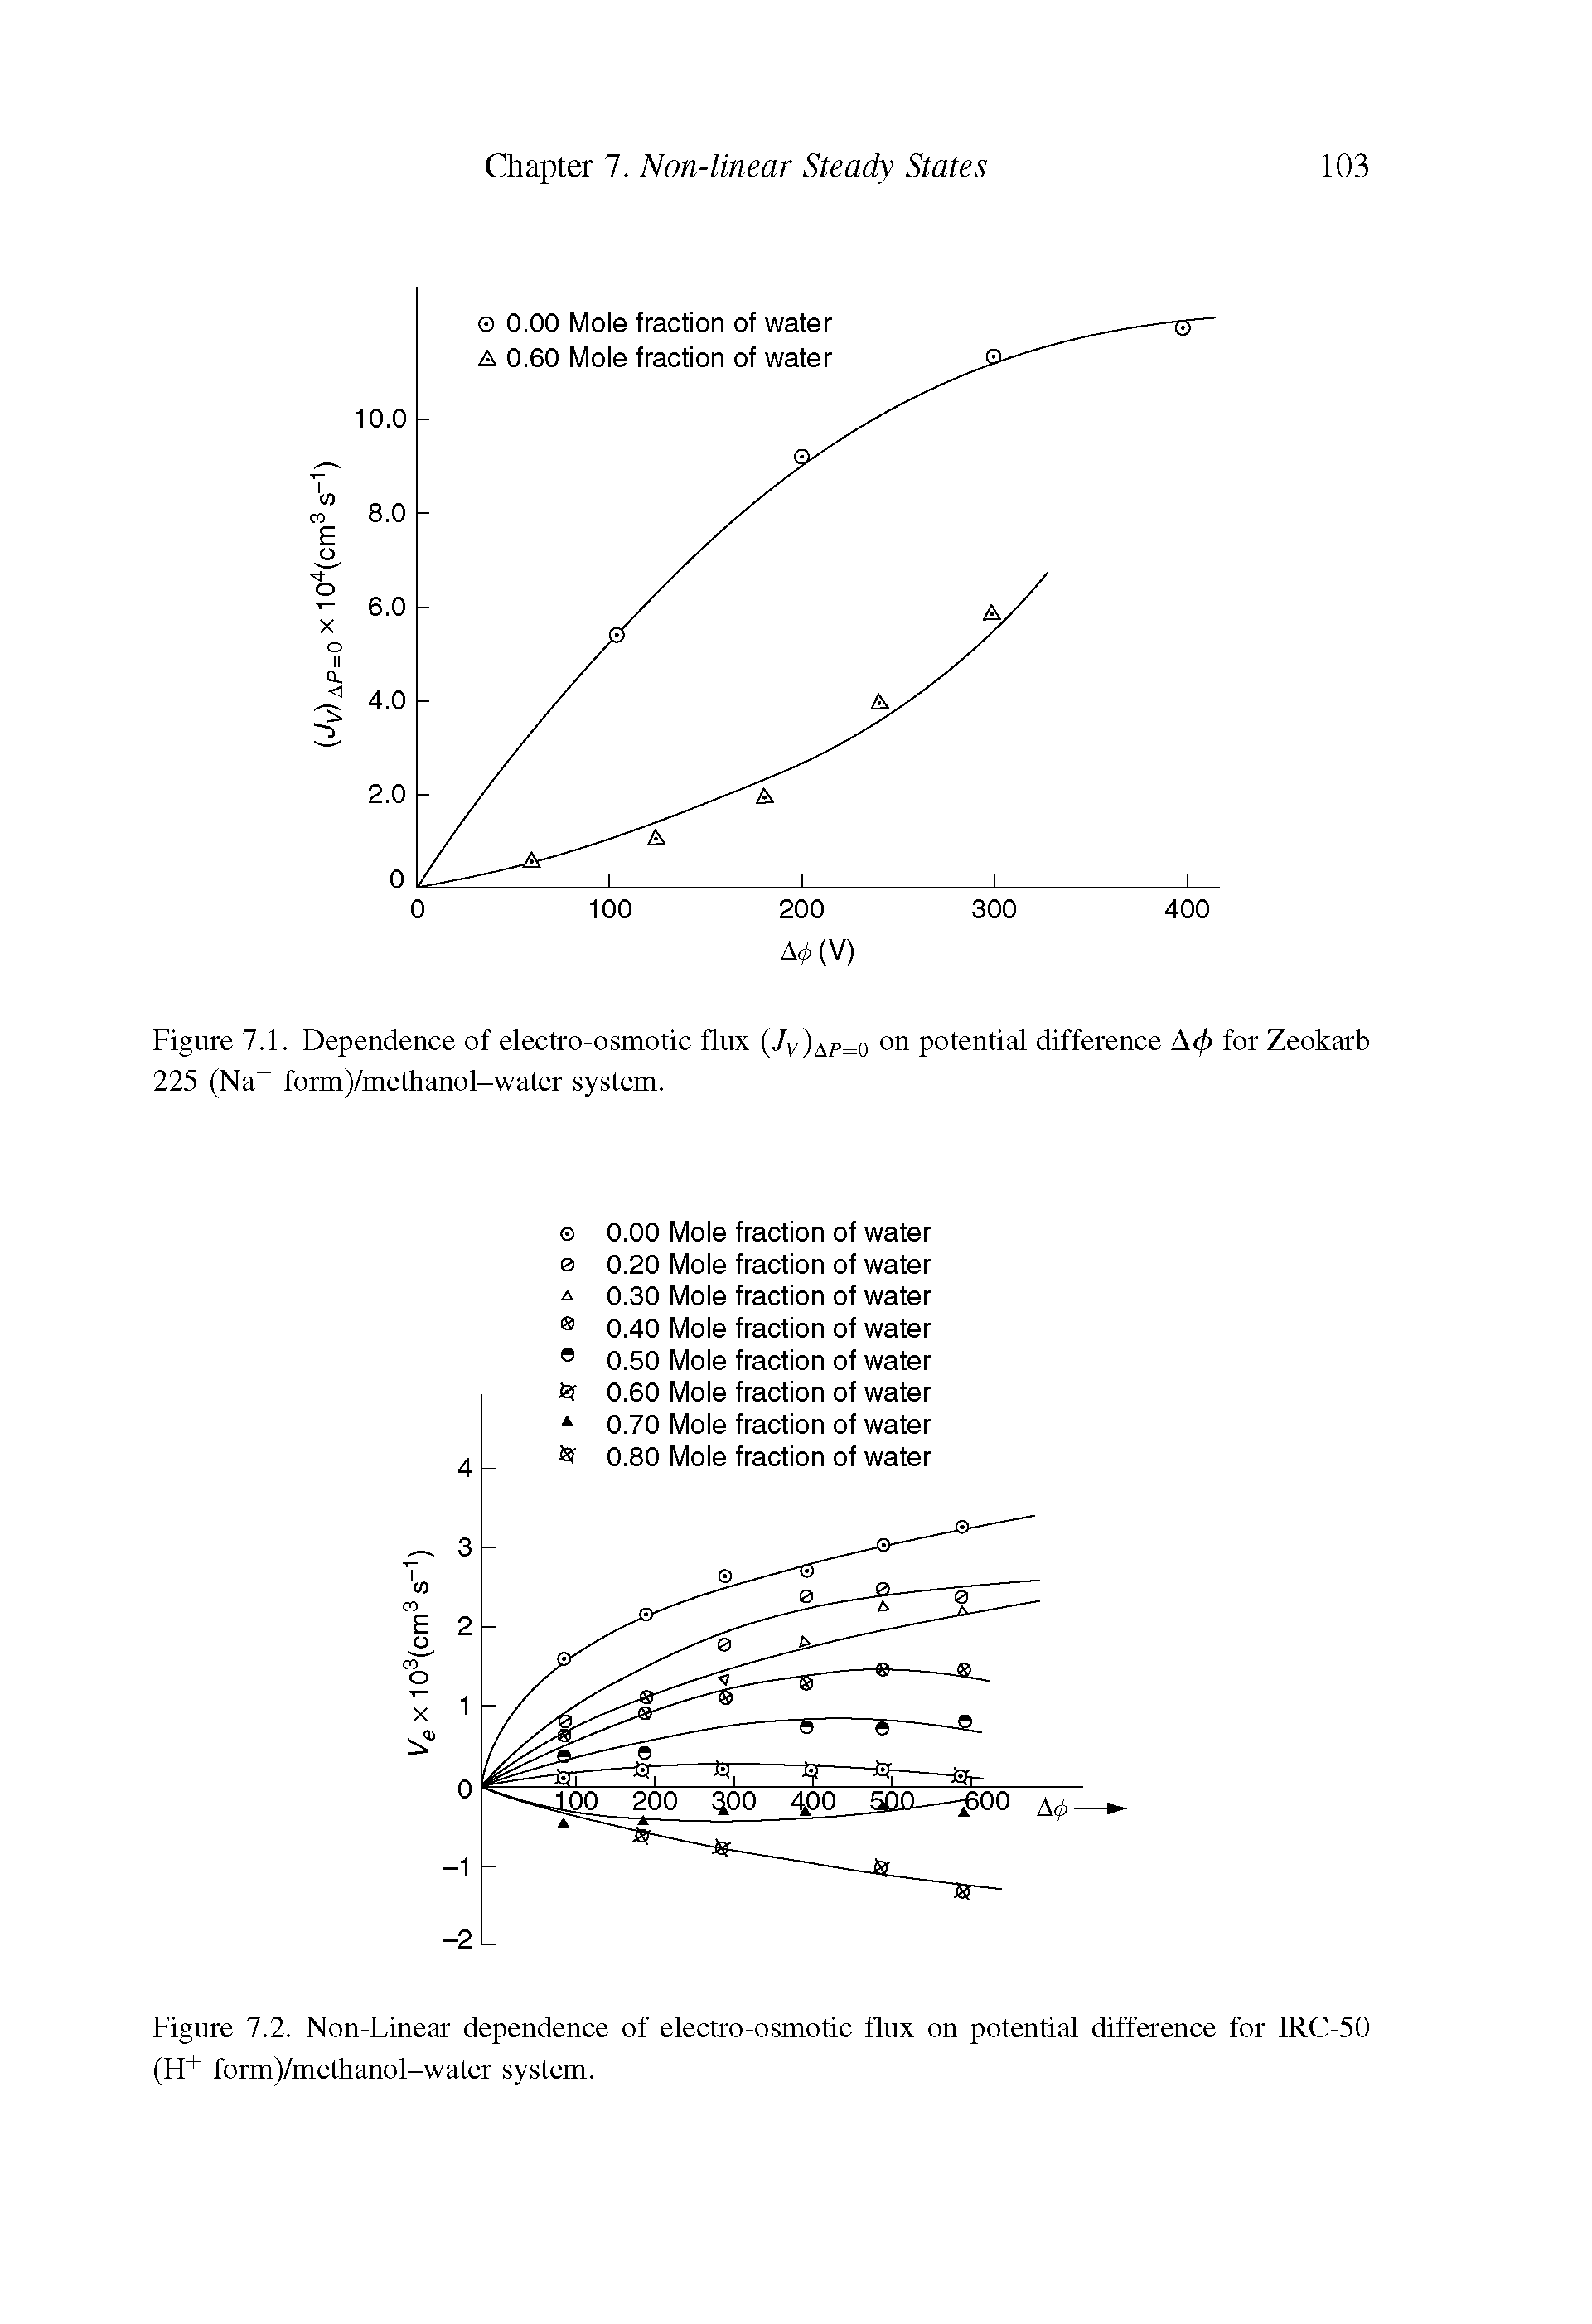 Figure 7.1. Dependence of electro-osmotic flux (Jv)ap=o on potential difference A(f> for Zeokarb 225 (Na+ form)/methano 1-water system.